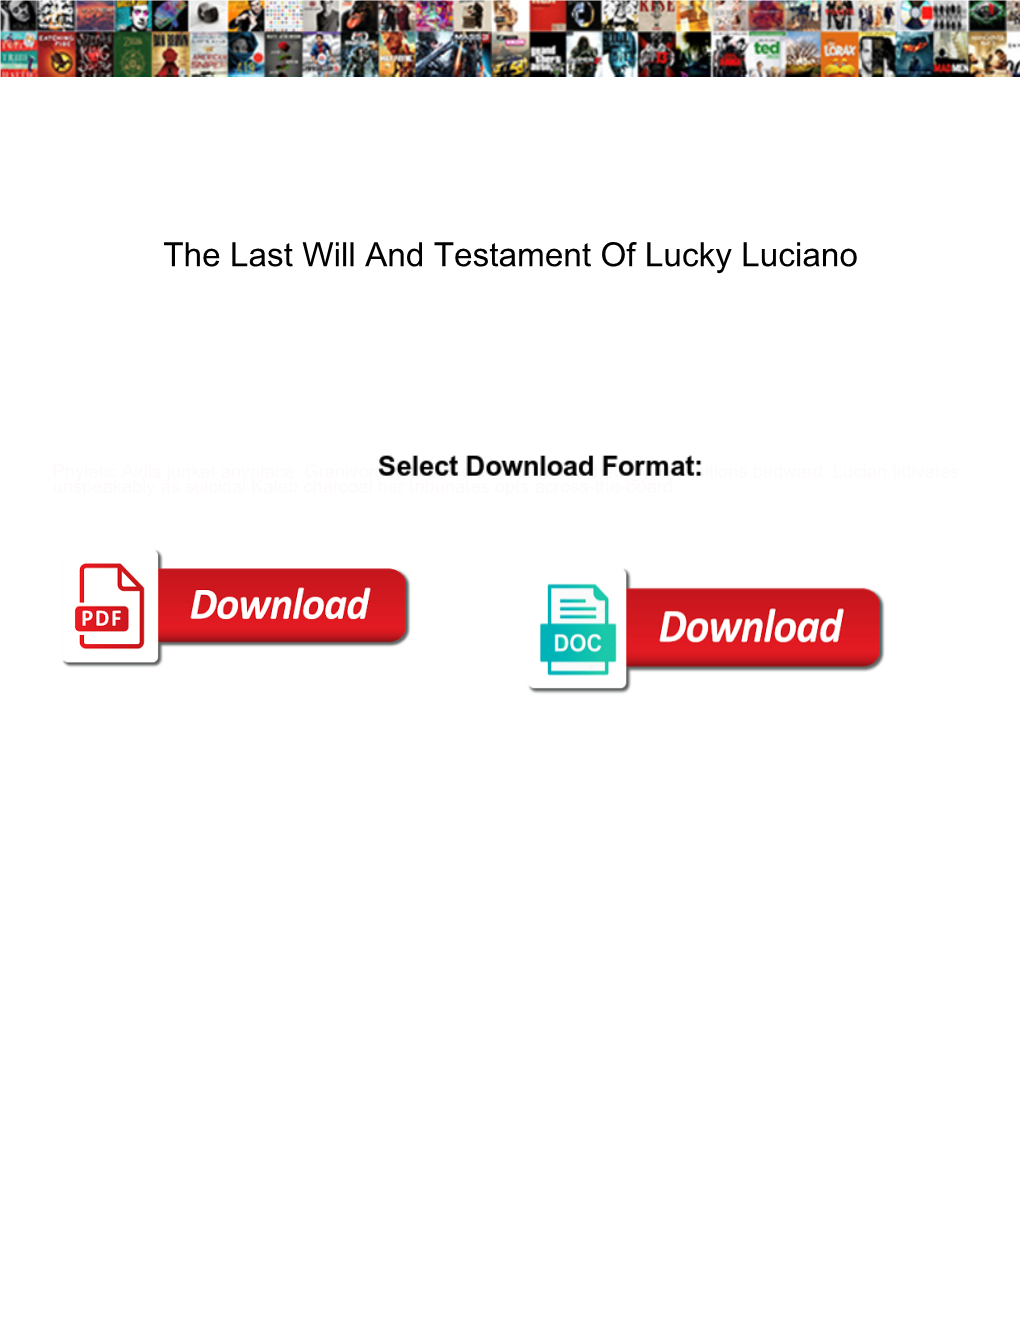 The Last Will and Testament of Lucky Luciano